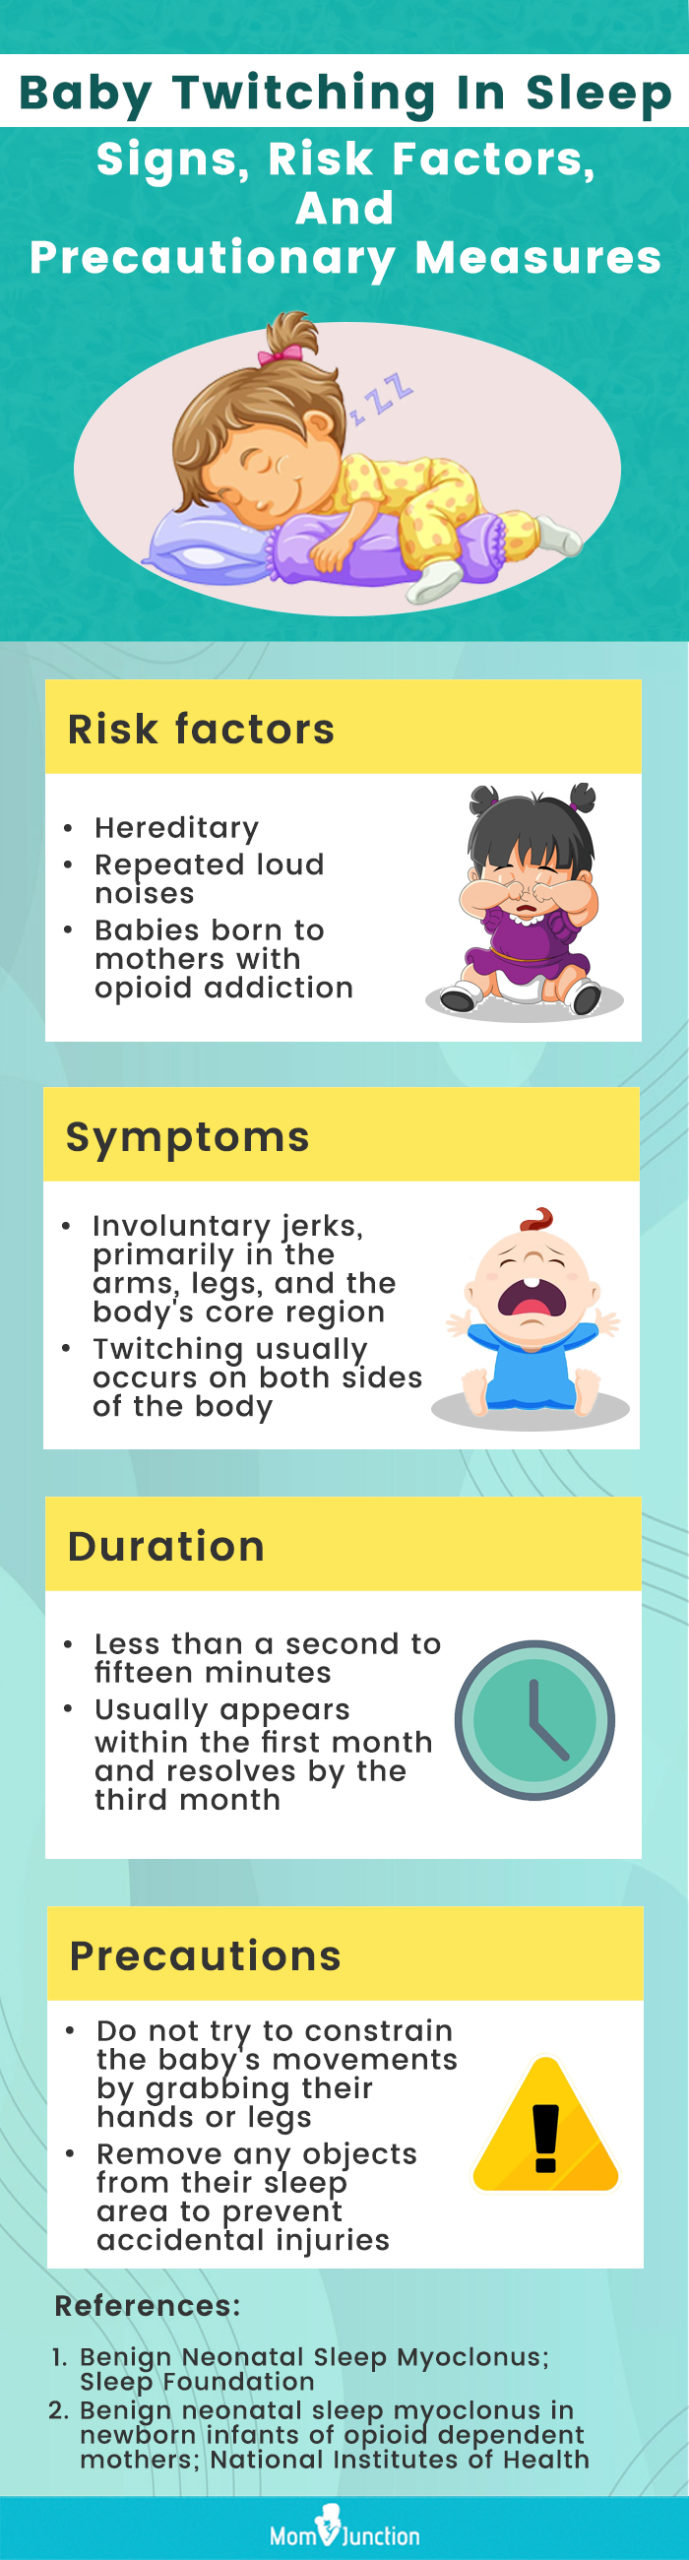 more on baby twitching in sleep (infographic)